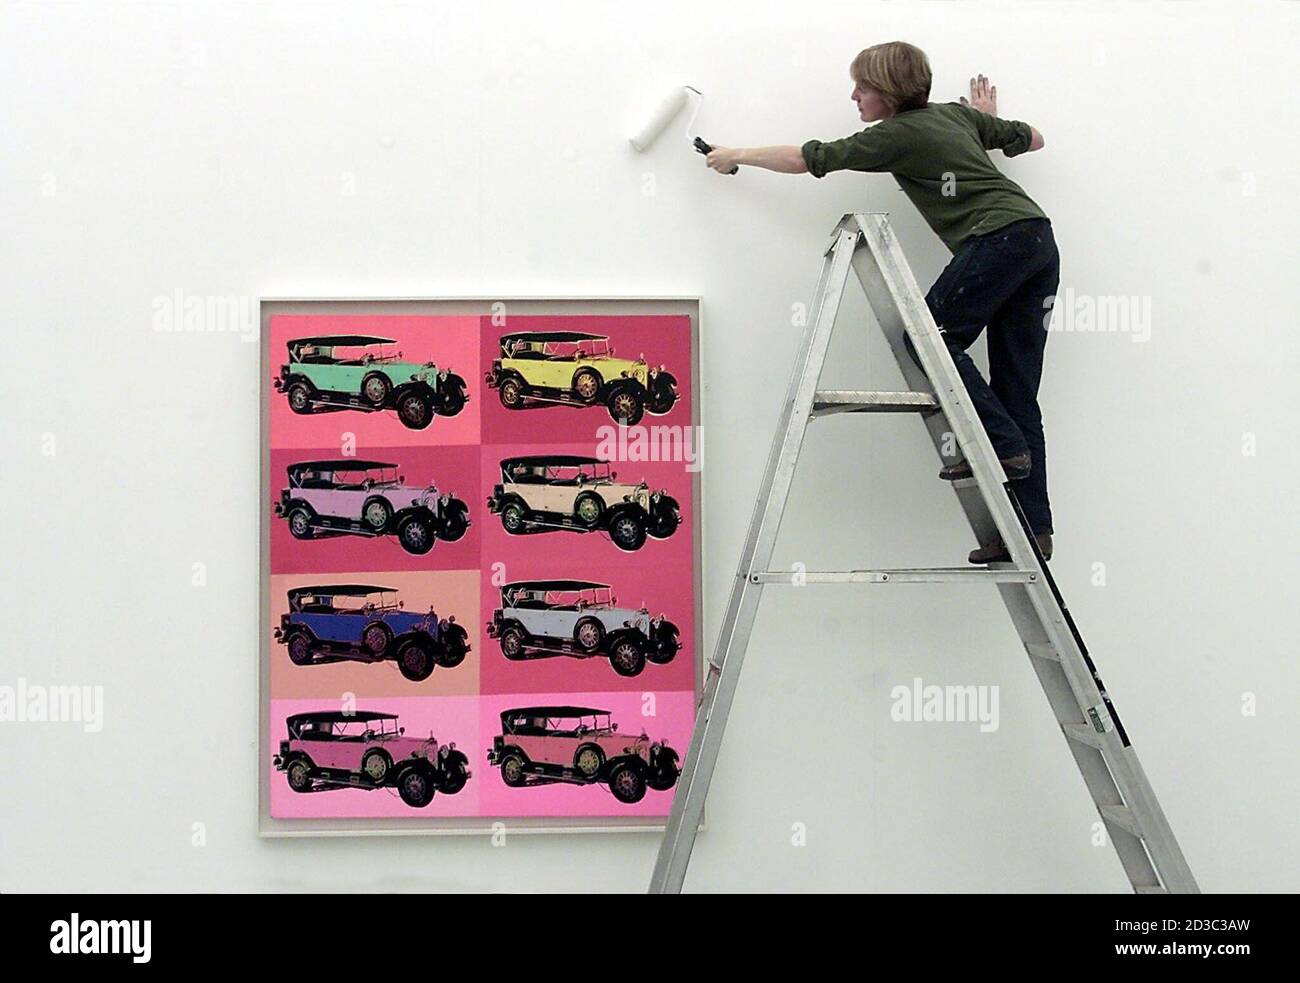 A gallery assistant white washes the walls around the Andy Warhol Painting 'Mercedes Type 400 Touring Car', an acrylic and silk screen ink on canvas, in the Milton Keynes Gallery, September 7, 2001. The works all belong to the Car series, Warhol's last cycle of paintings before his death in 1987. It is their first showing in Britain. REUTERS/Darren Staples  DS/MC/AA Stock Photo